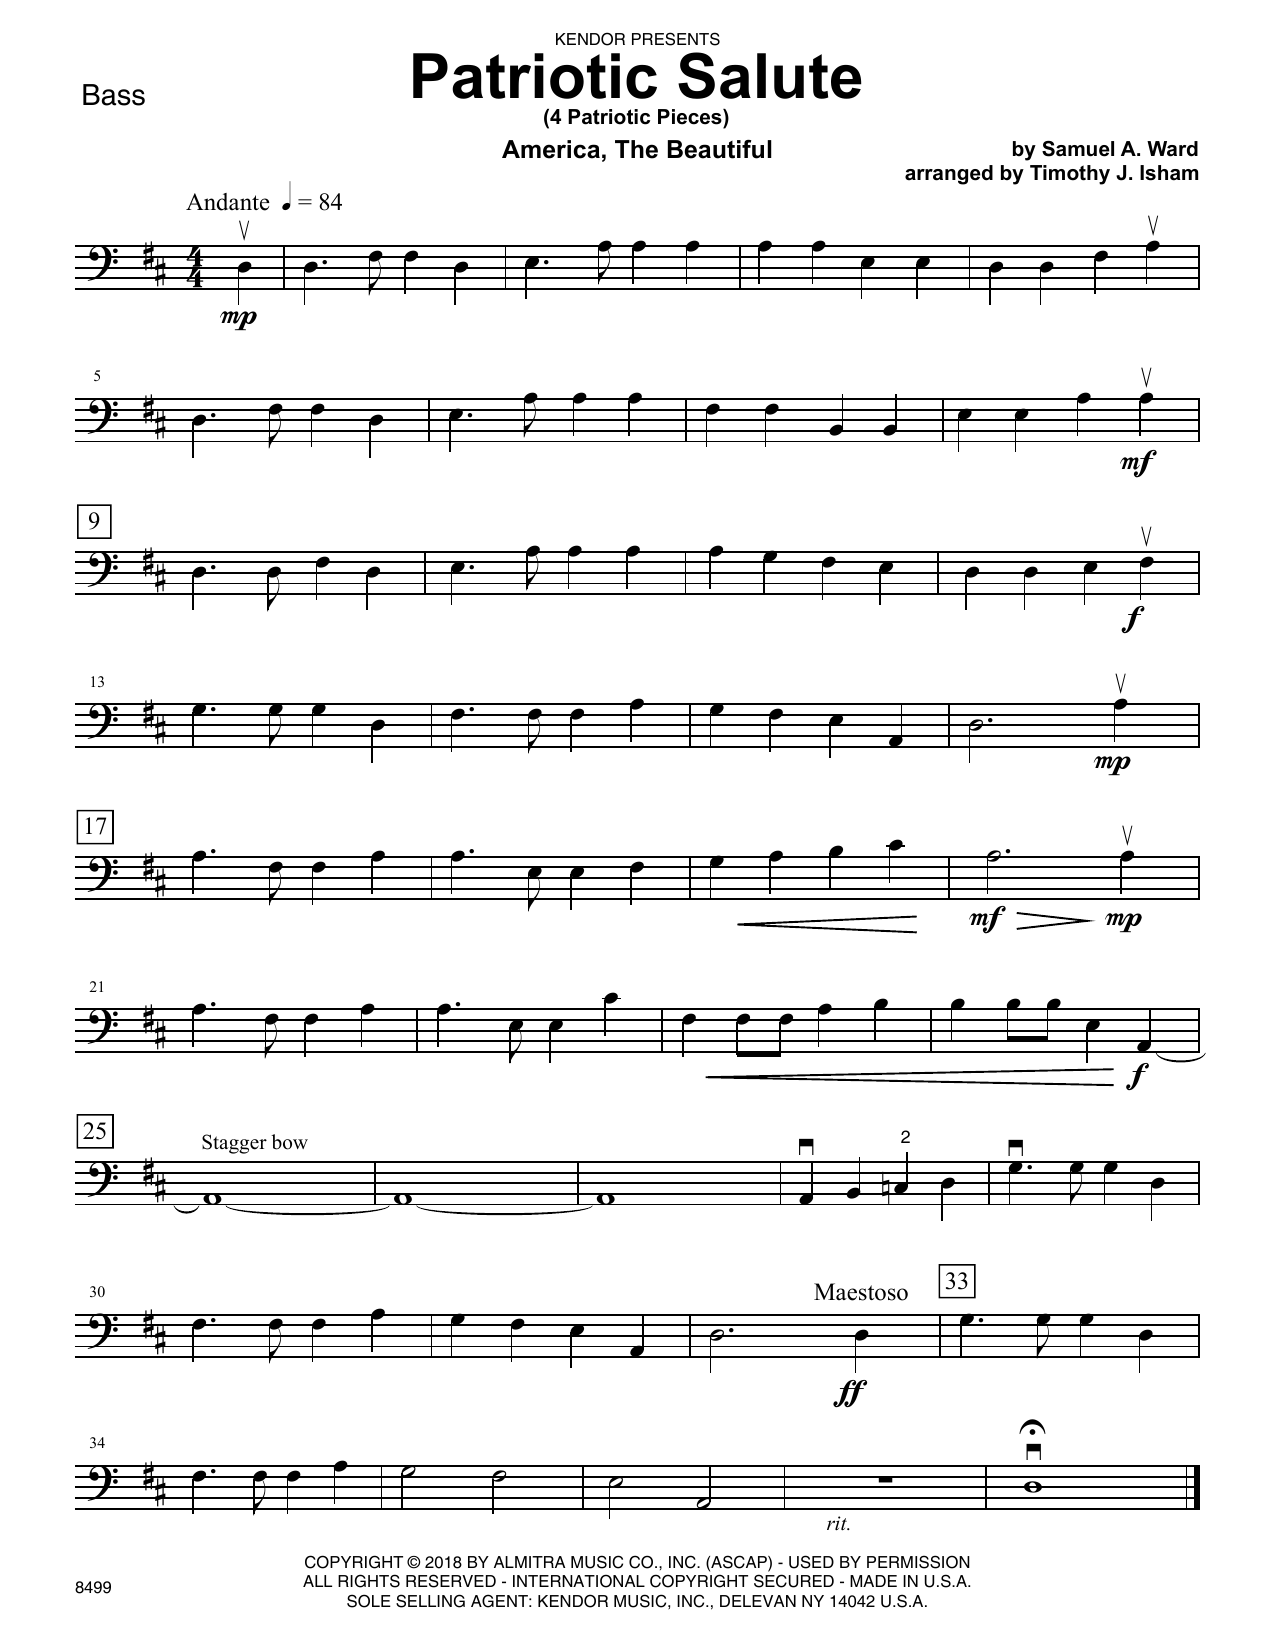 Timothy Isham Patriotic Salute (4 Patriotic Pieces) - Bass sheet music preview music notes and score for Orchestra including 4 page(s)